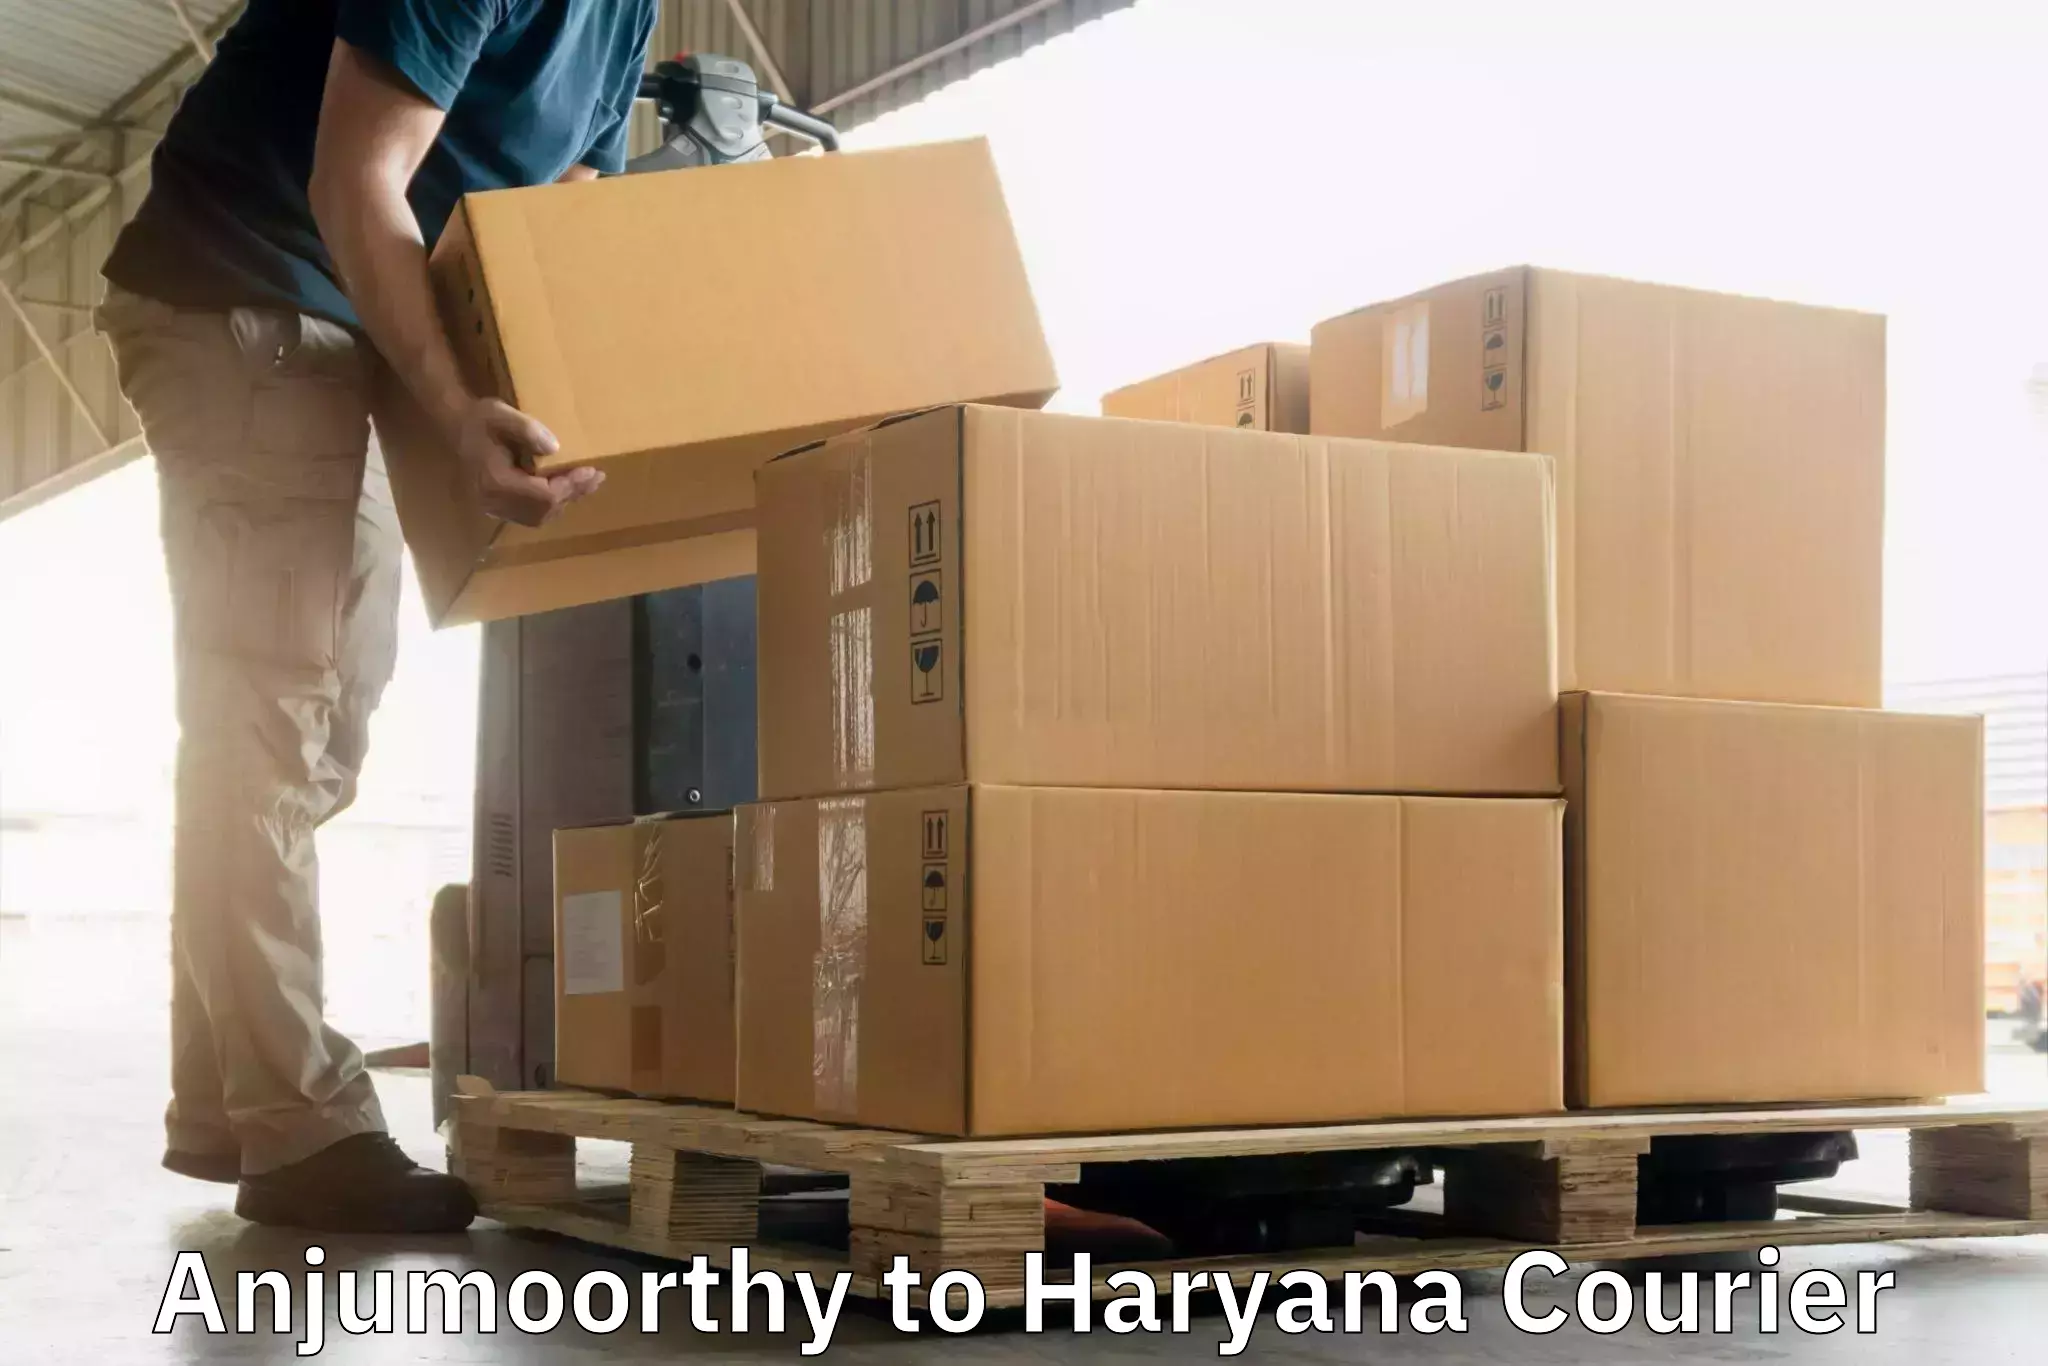 Advanced package delivery Anjumoorthy to Odhan